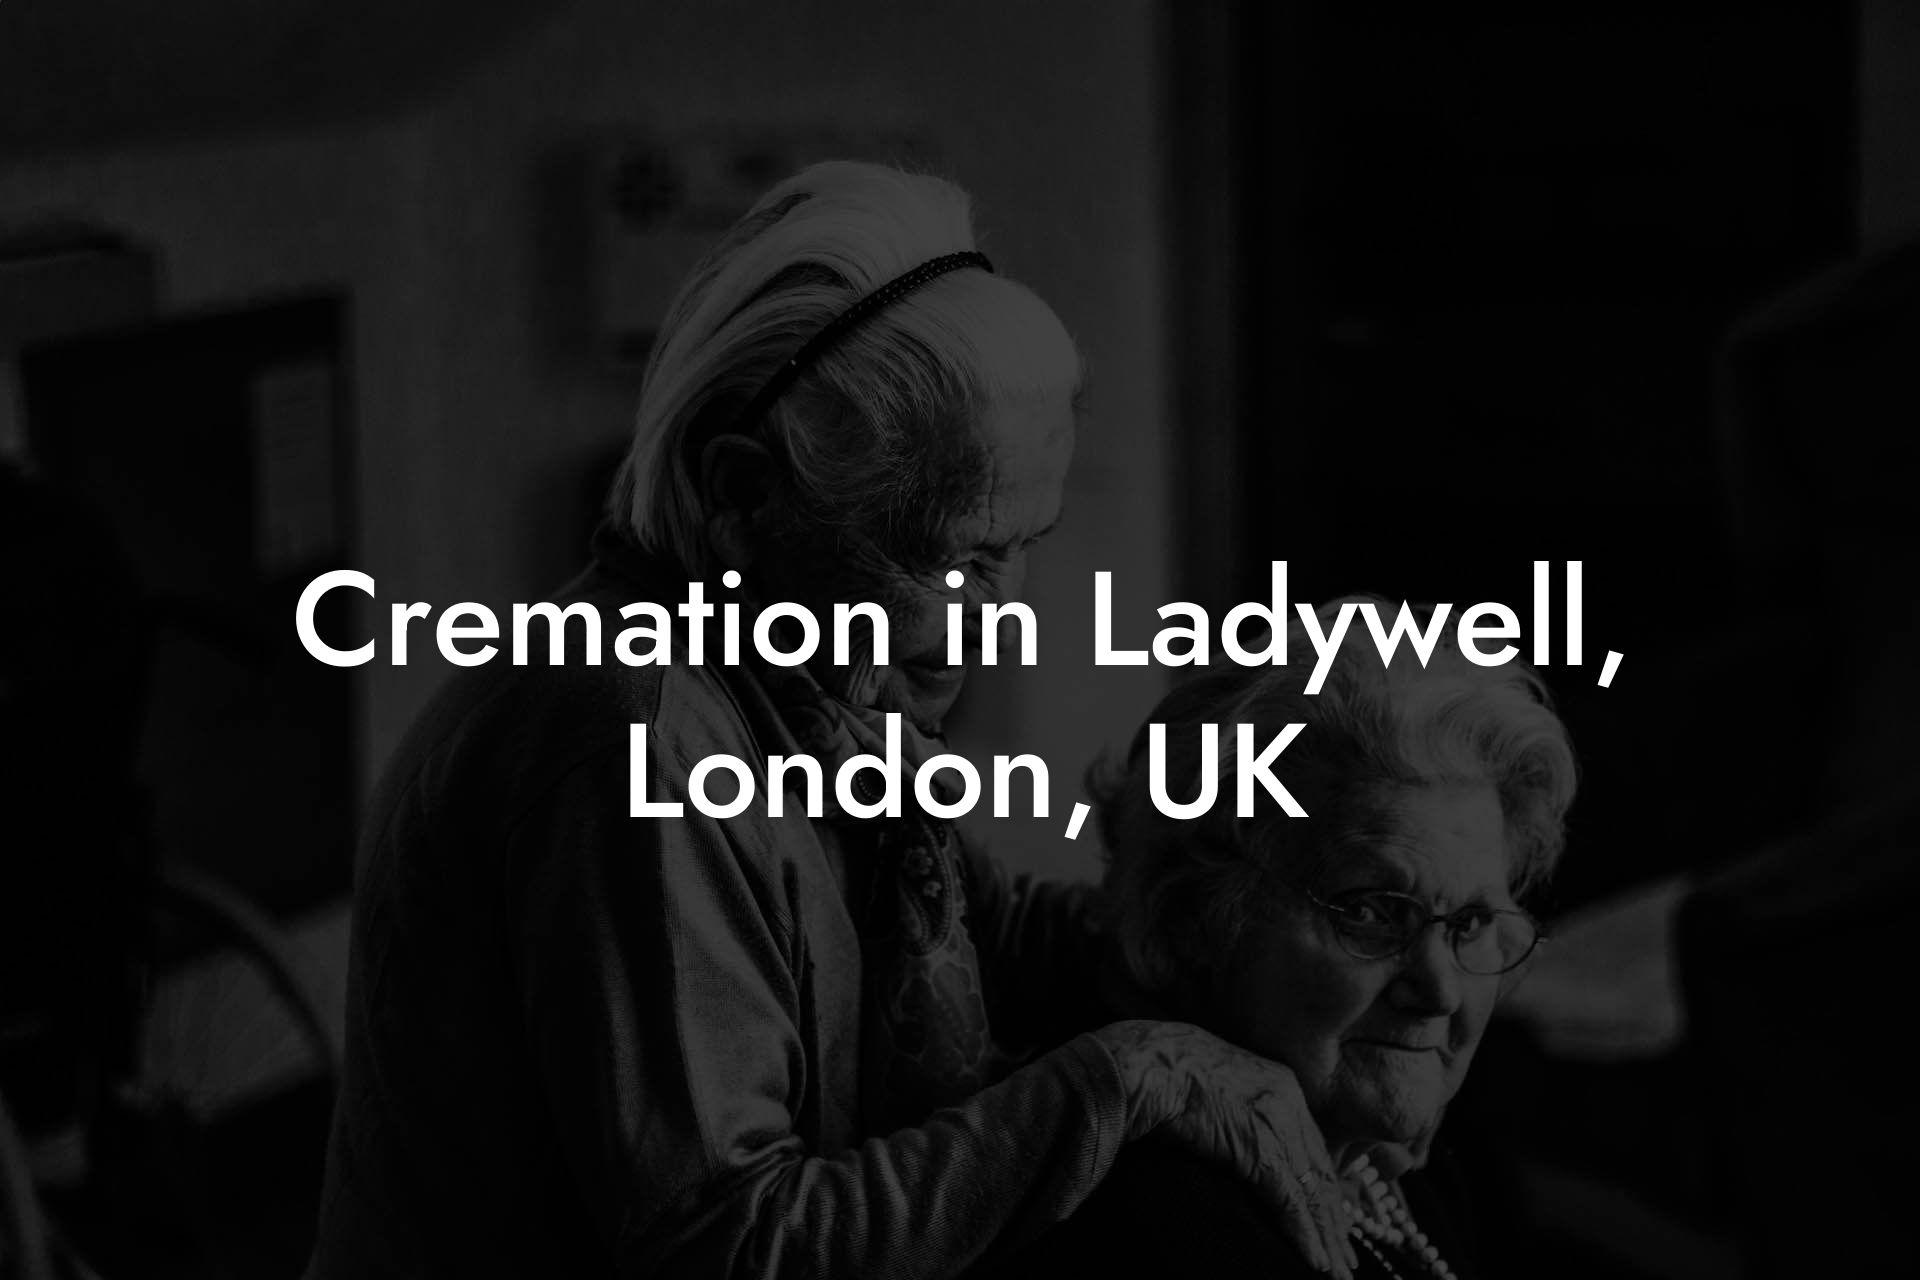 Cremation in Ladywell, London, UK